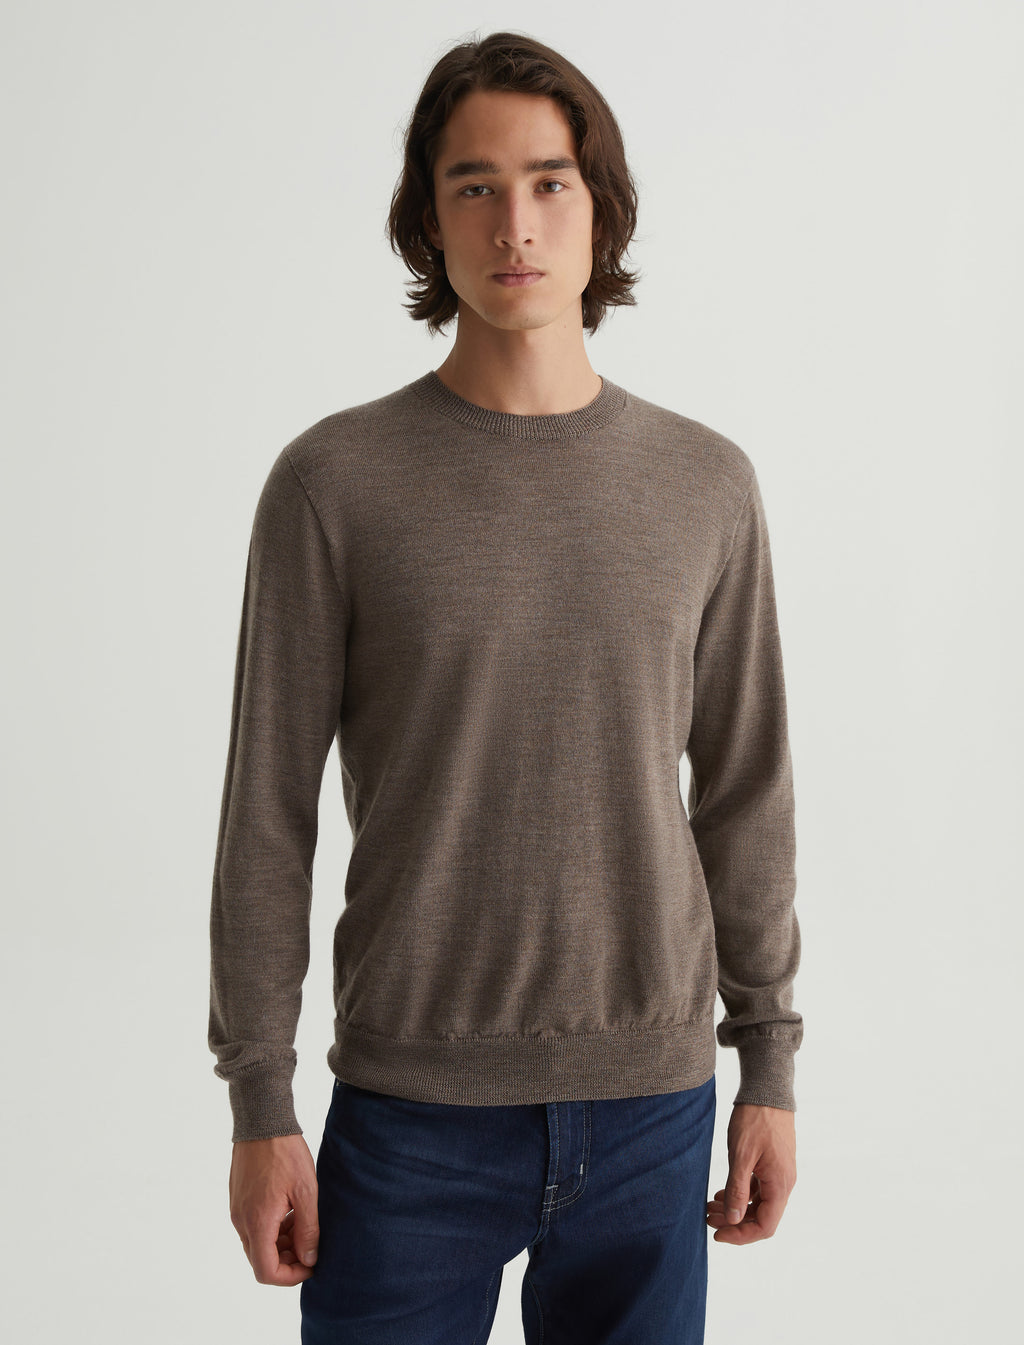 Men's Sweaters at AG Jeans Official Store